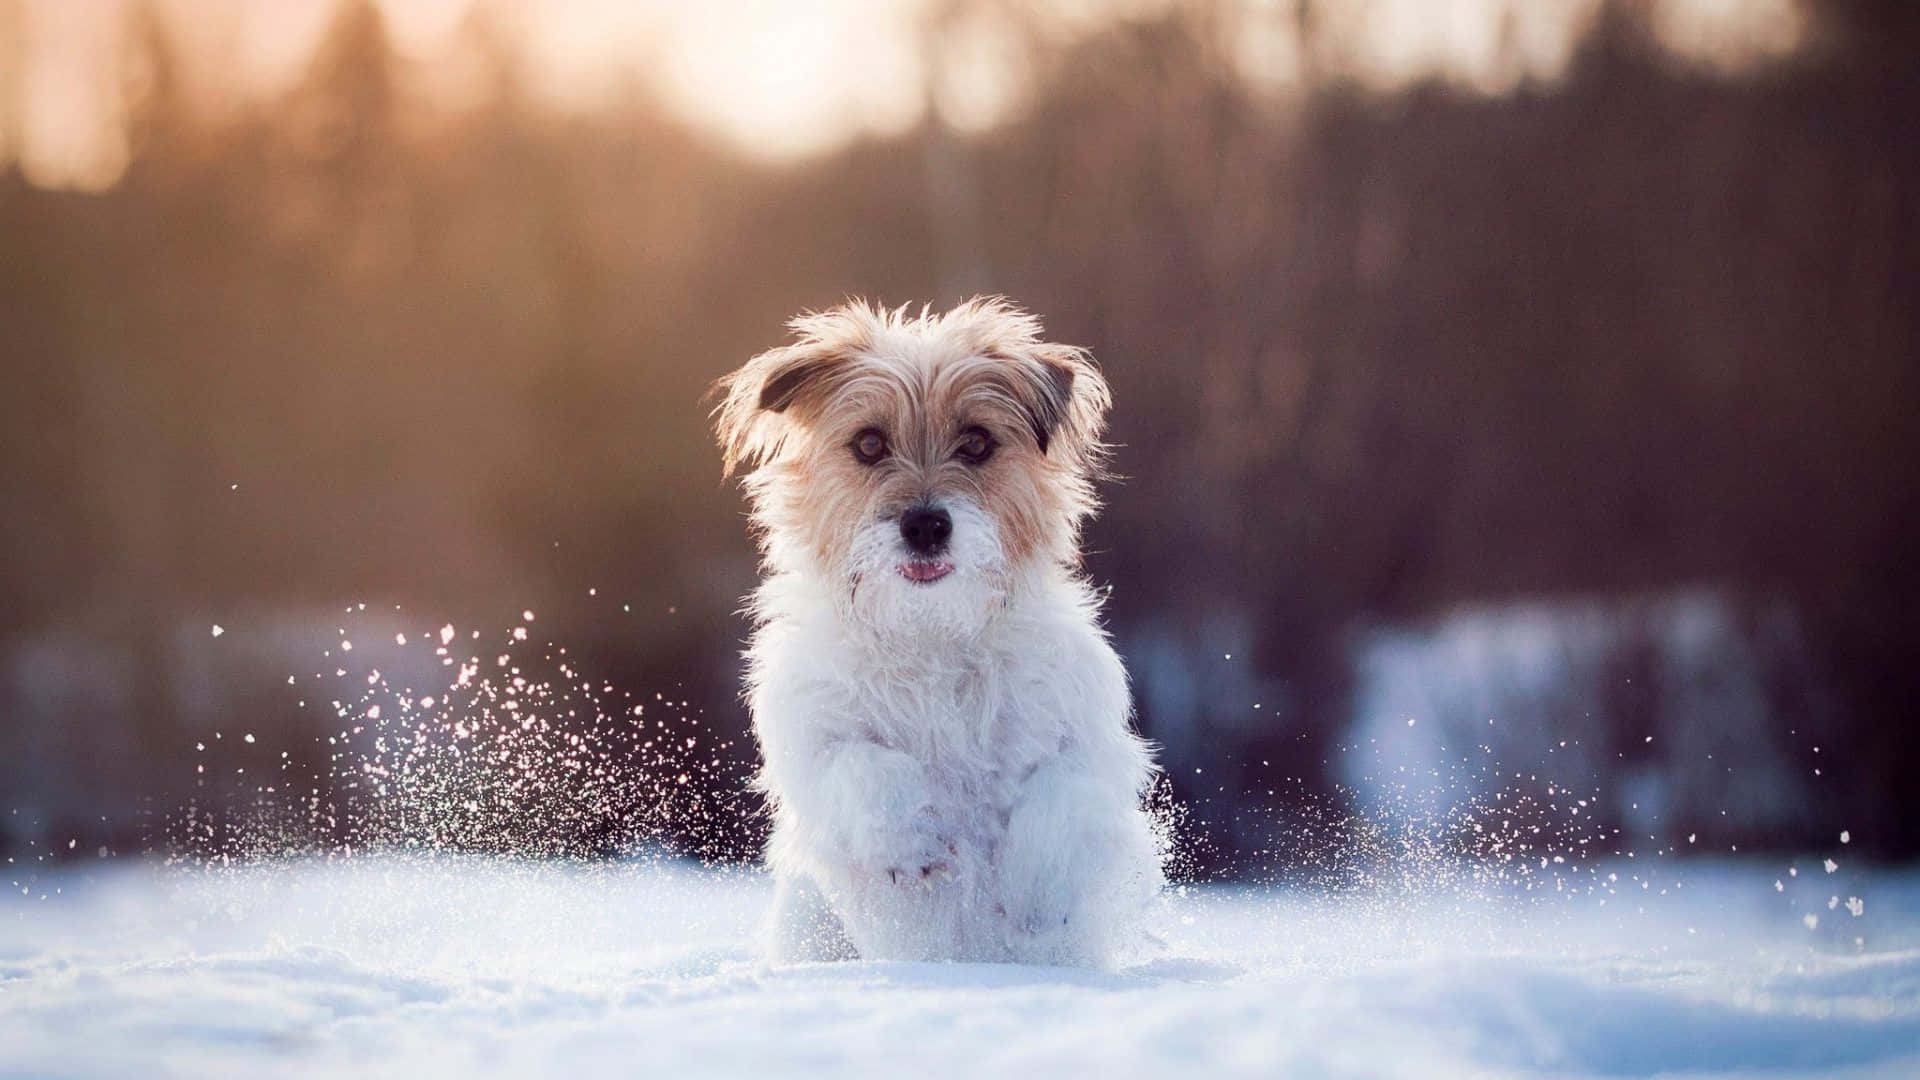 This cute pup is ready for winter adventures! Wallpaper